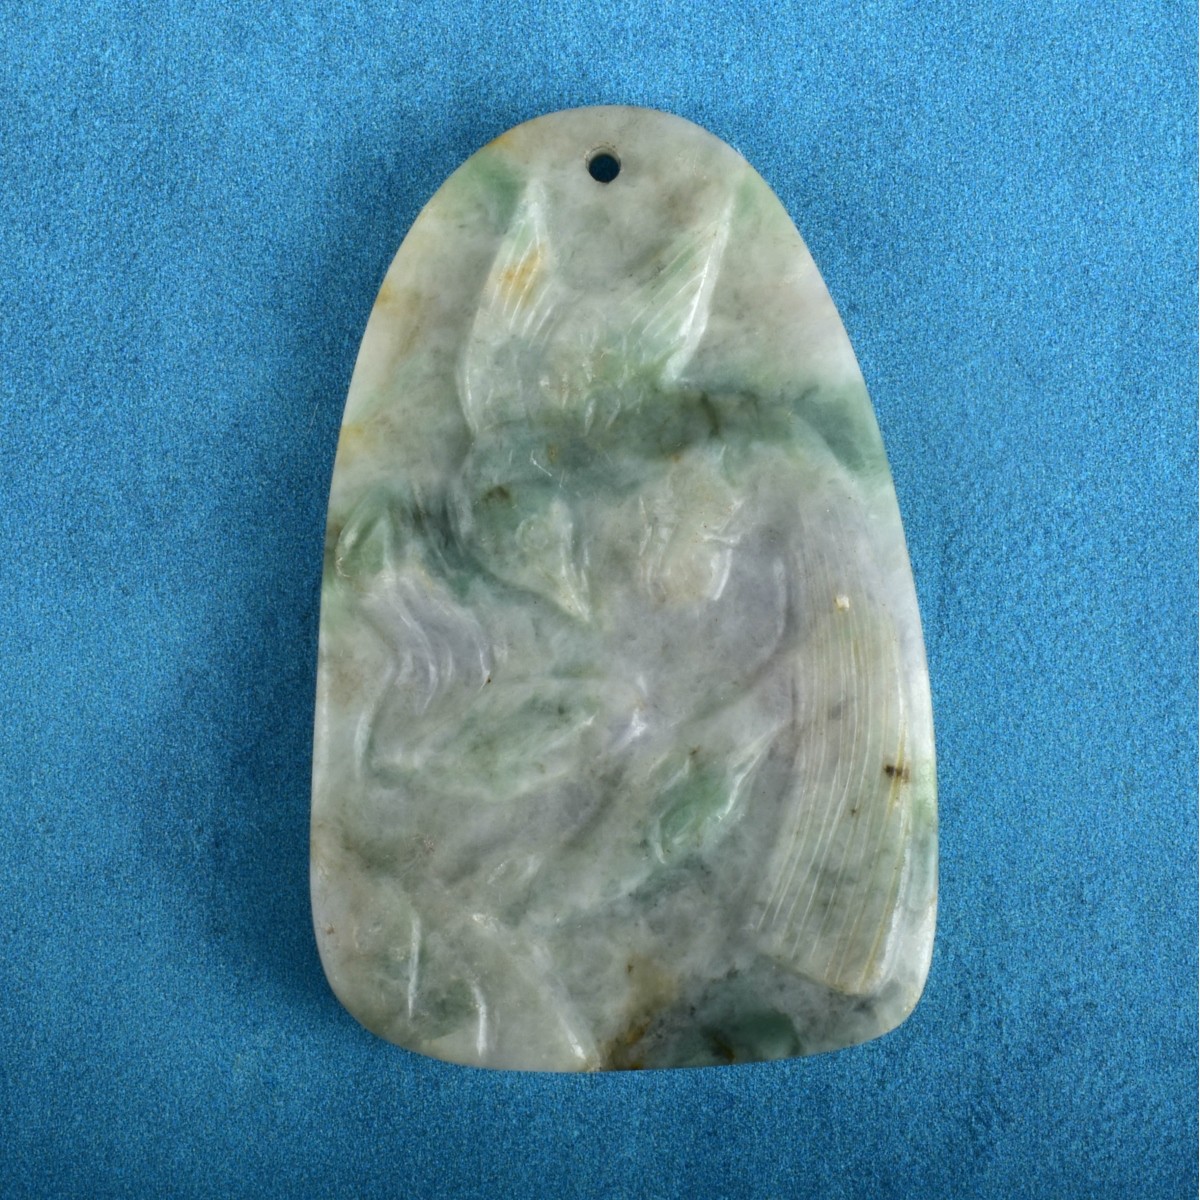 Antique Chinese Carved Jade Pendant